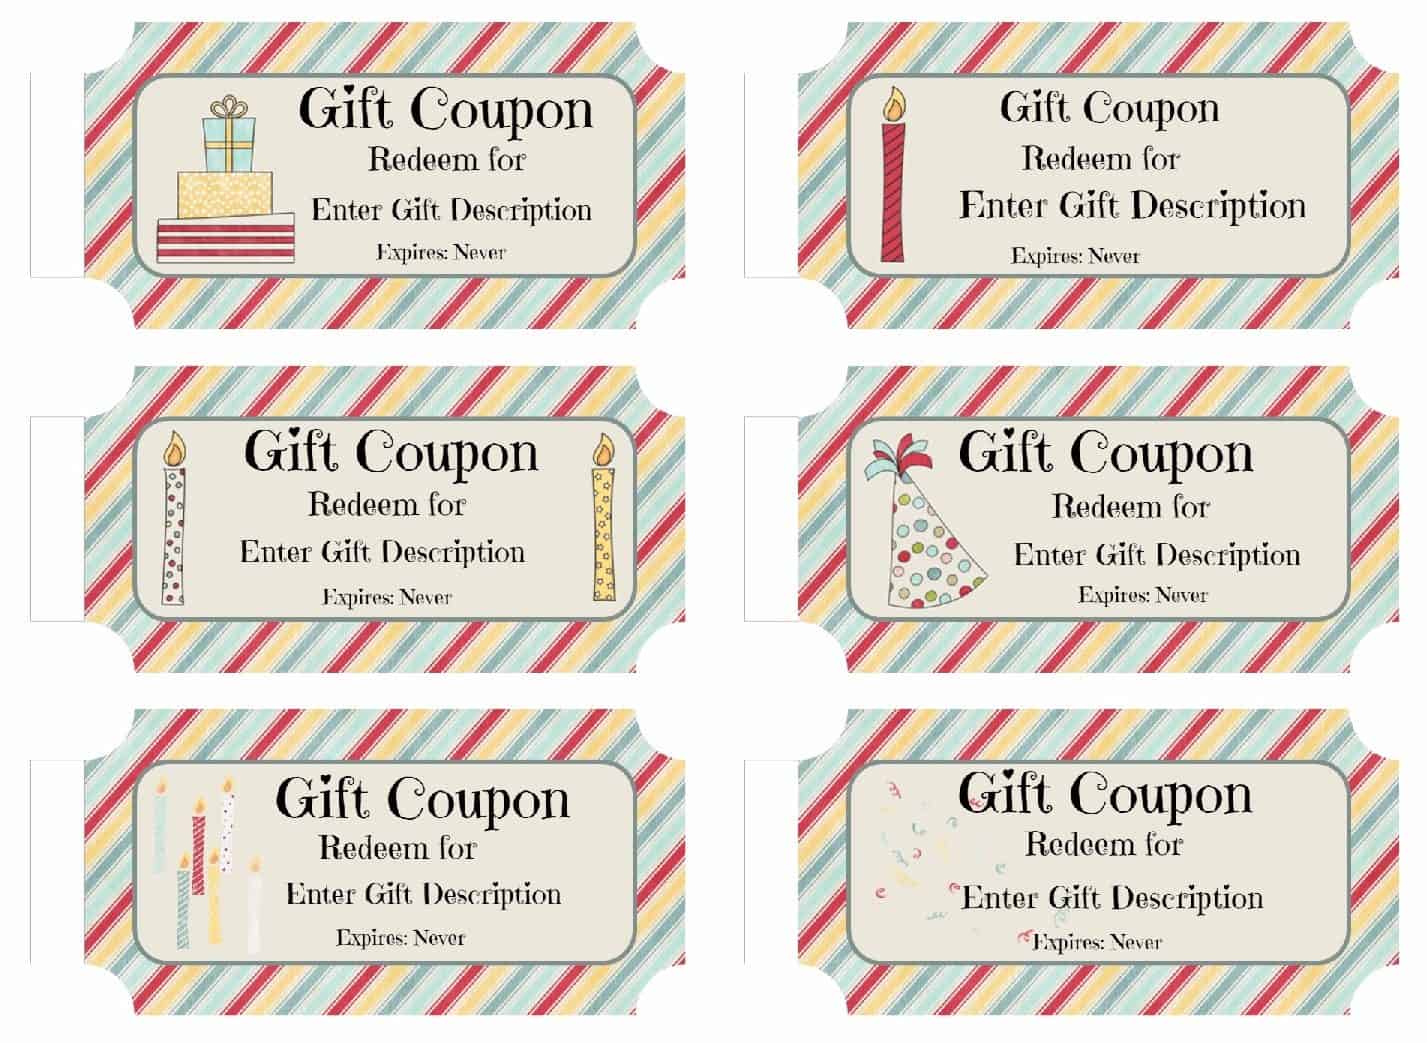 Free Custom Birthday Coupons - Customize Online & Print at Home